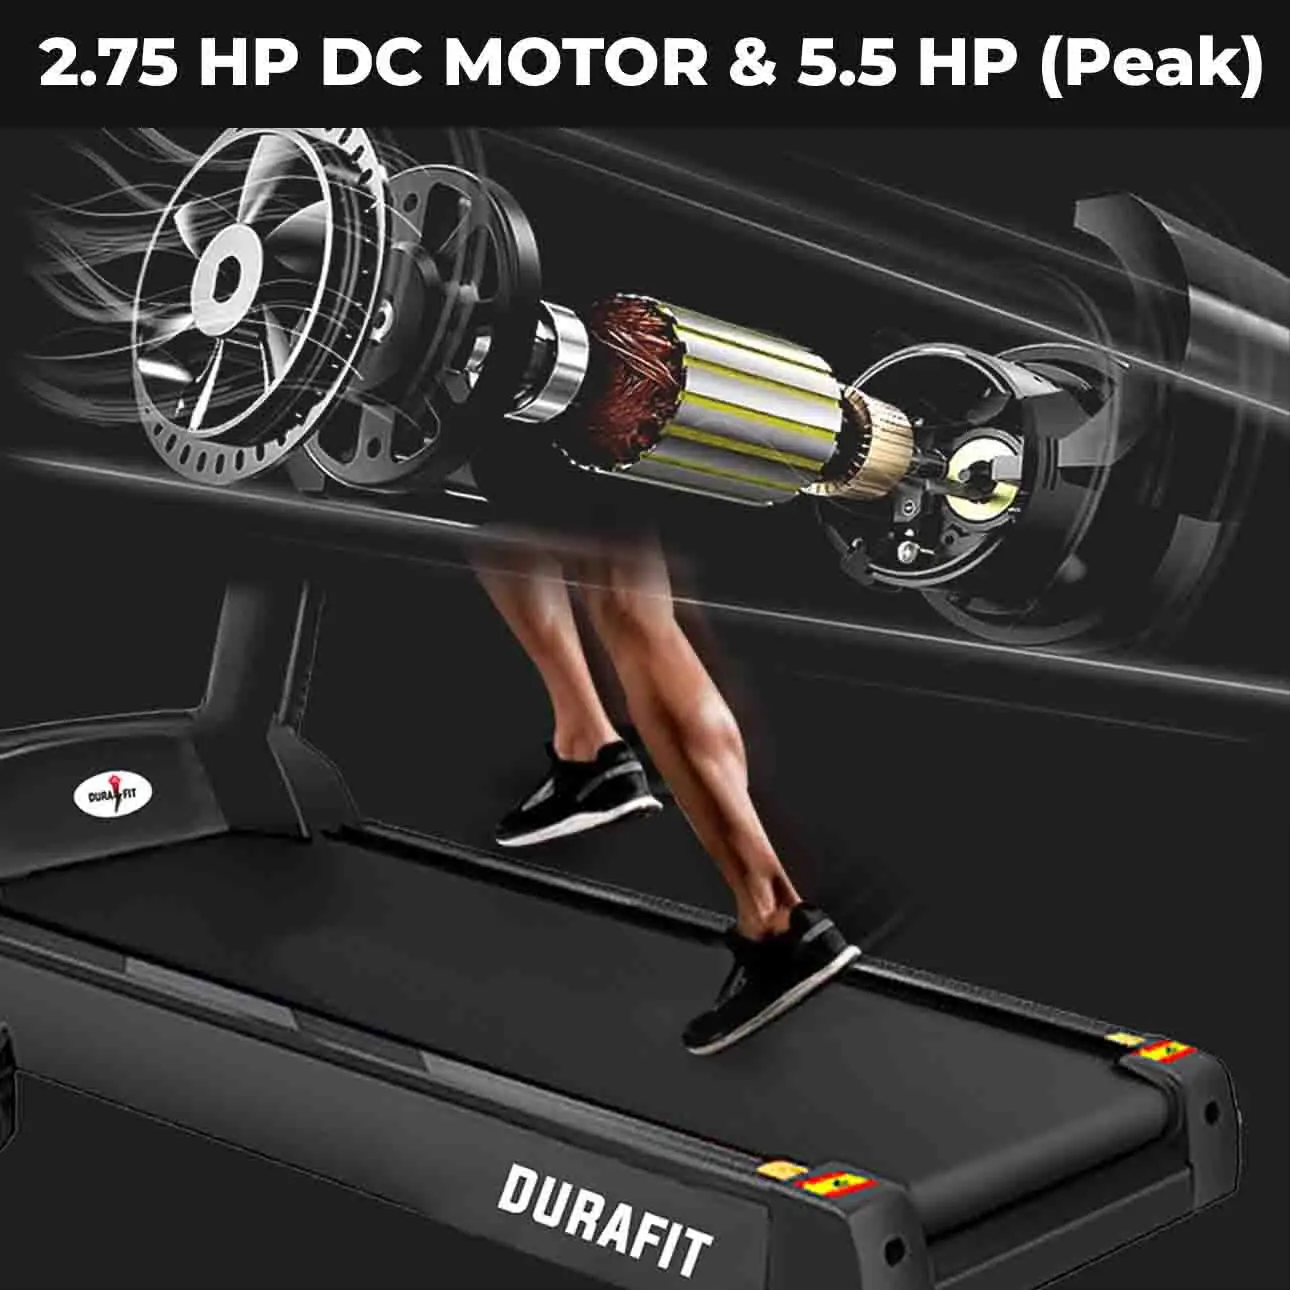 Durafit Panther Multifunction Treadmill with 2.75 HP DC Motor